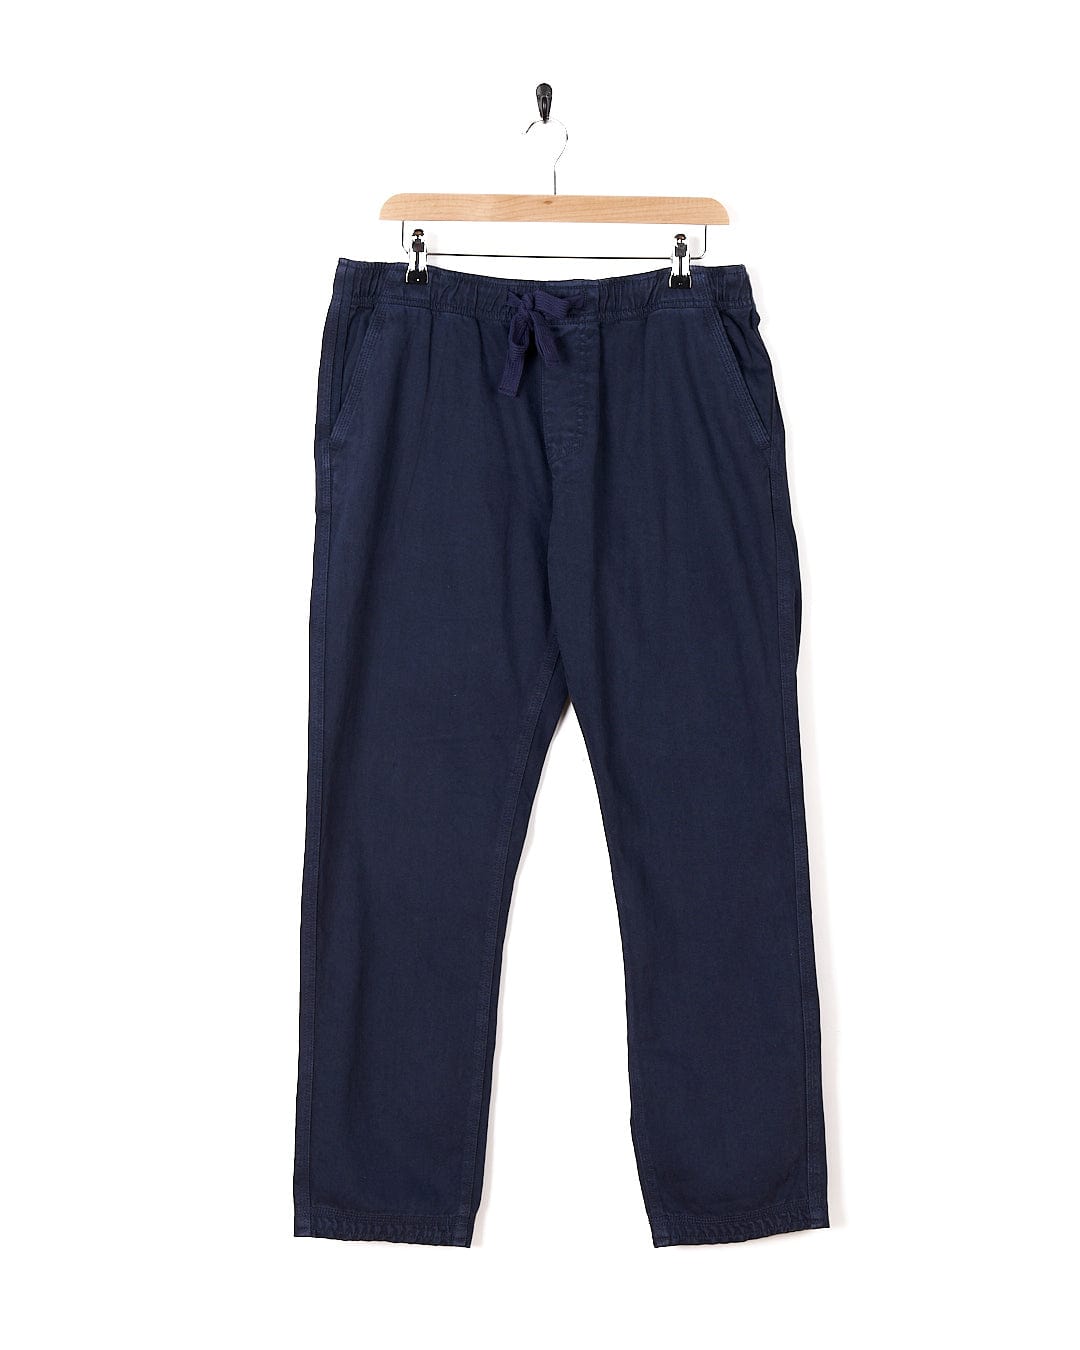 A pair of Meddon - Mens Twill Trouser - Navy by Saltrock hanging on a hanger.